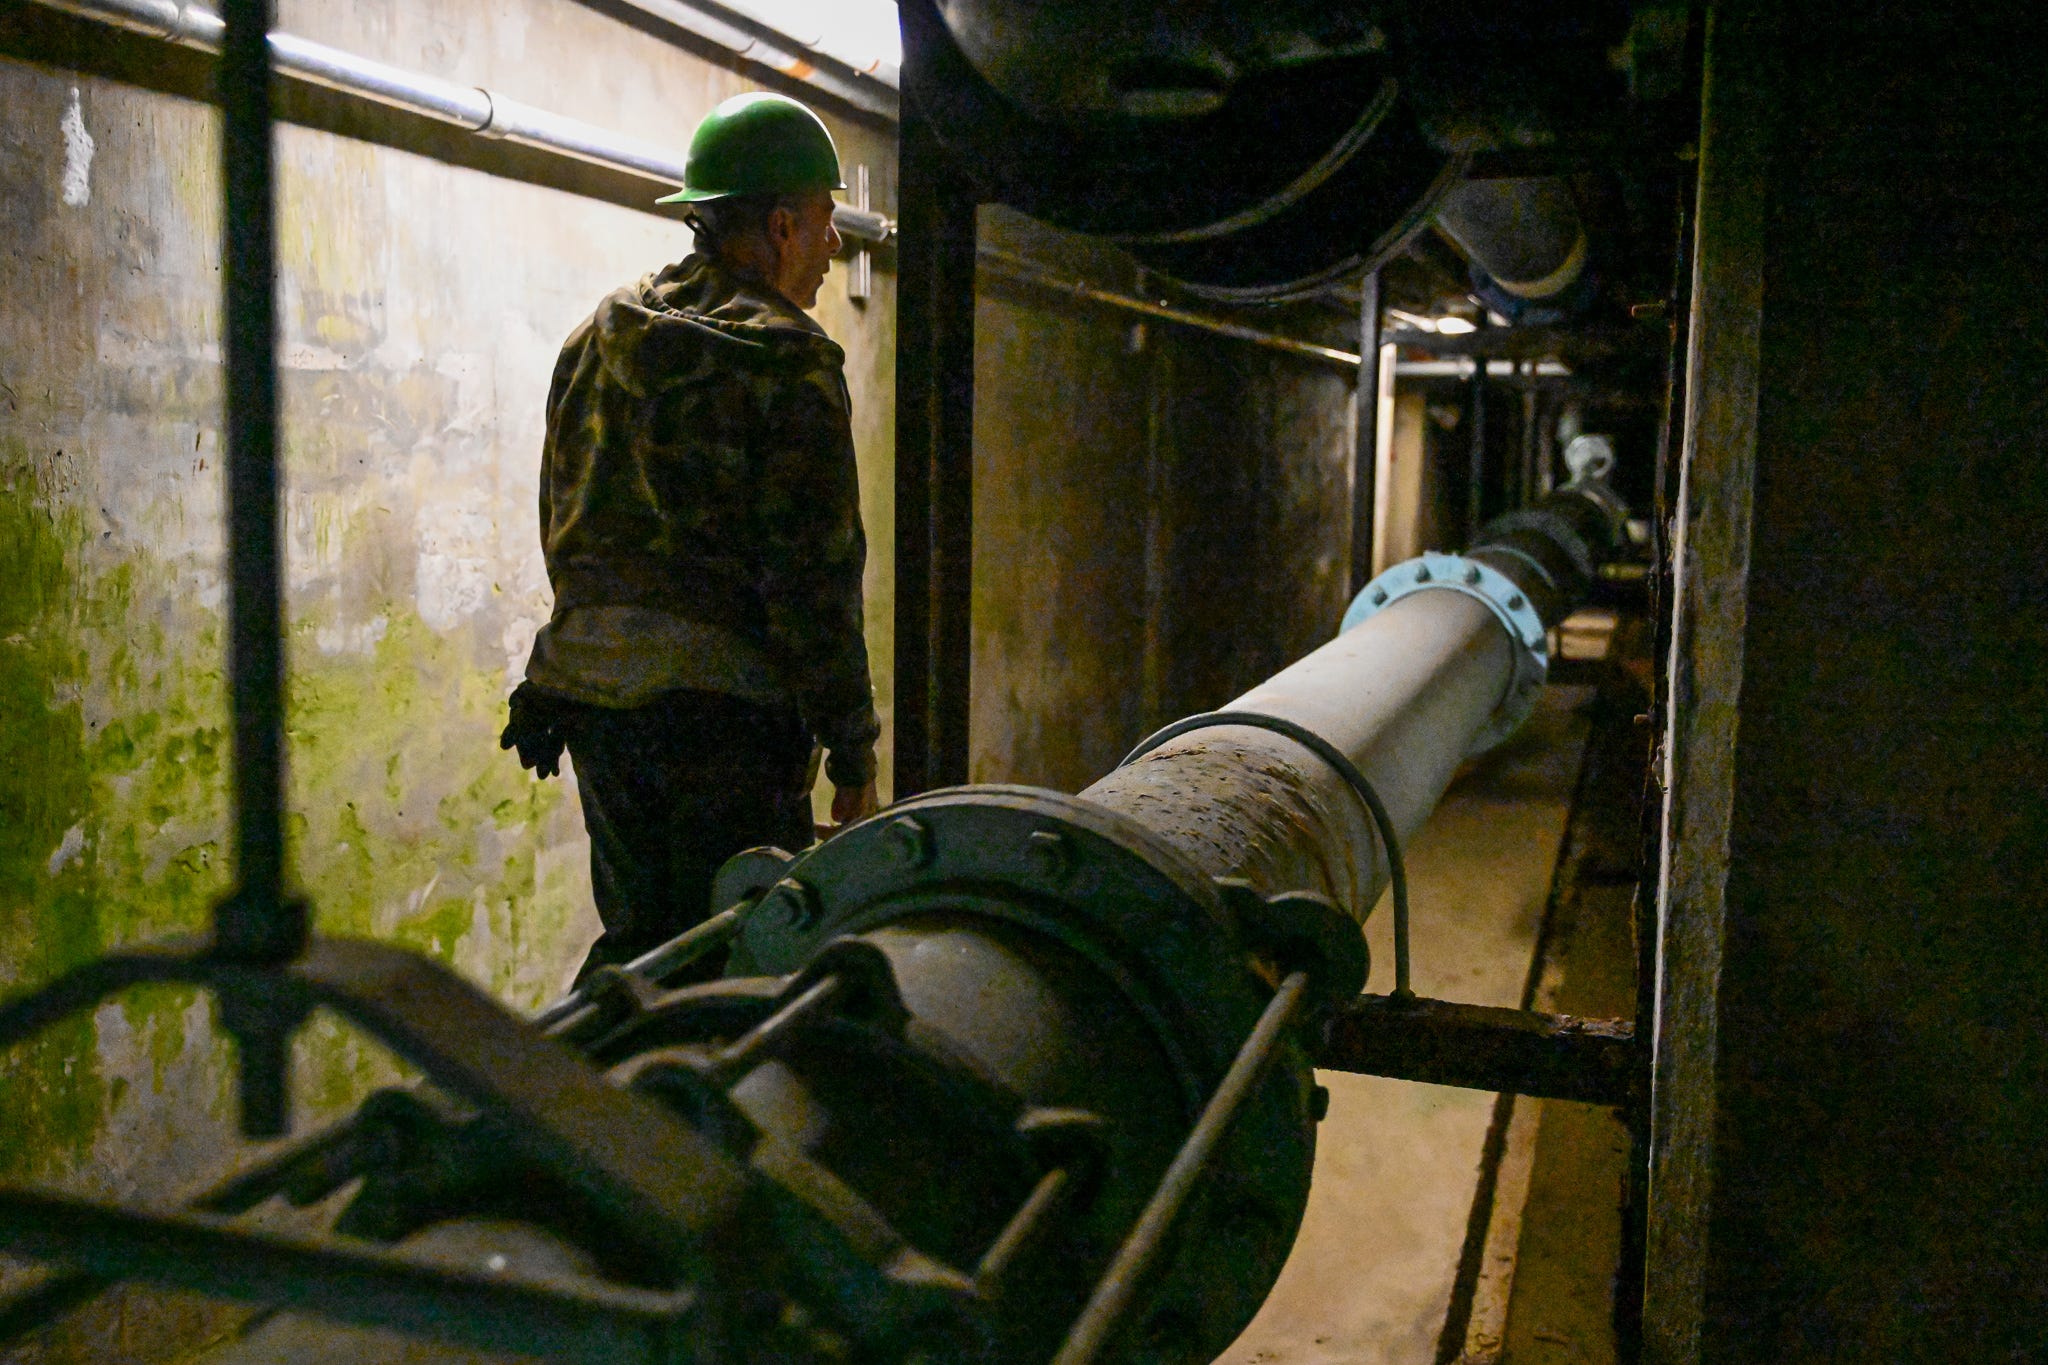 a man in a camouflaged hoodie and green hard hat walks in a gloomy tunnel under the glow of singular overhead LED lights. he is seen between brackets of a wall-mounted pipe filled with water as he walks forward into the darkness. pic by Nicole Harvel.